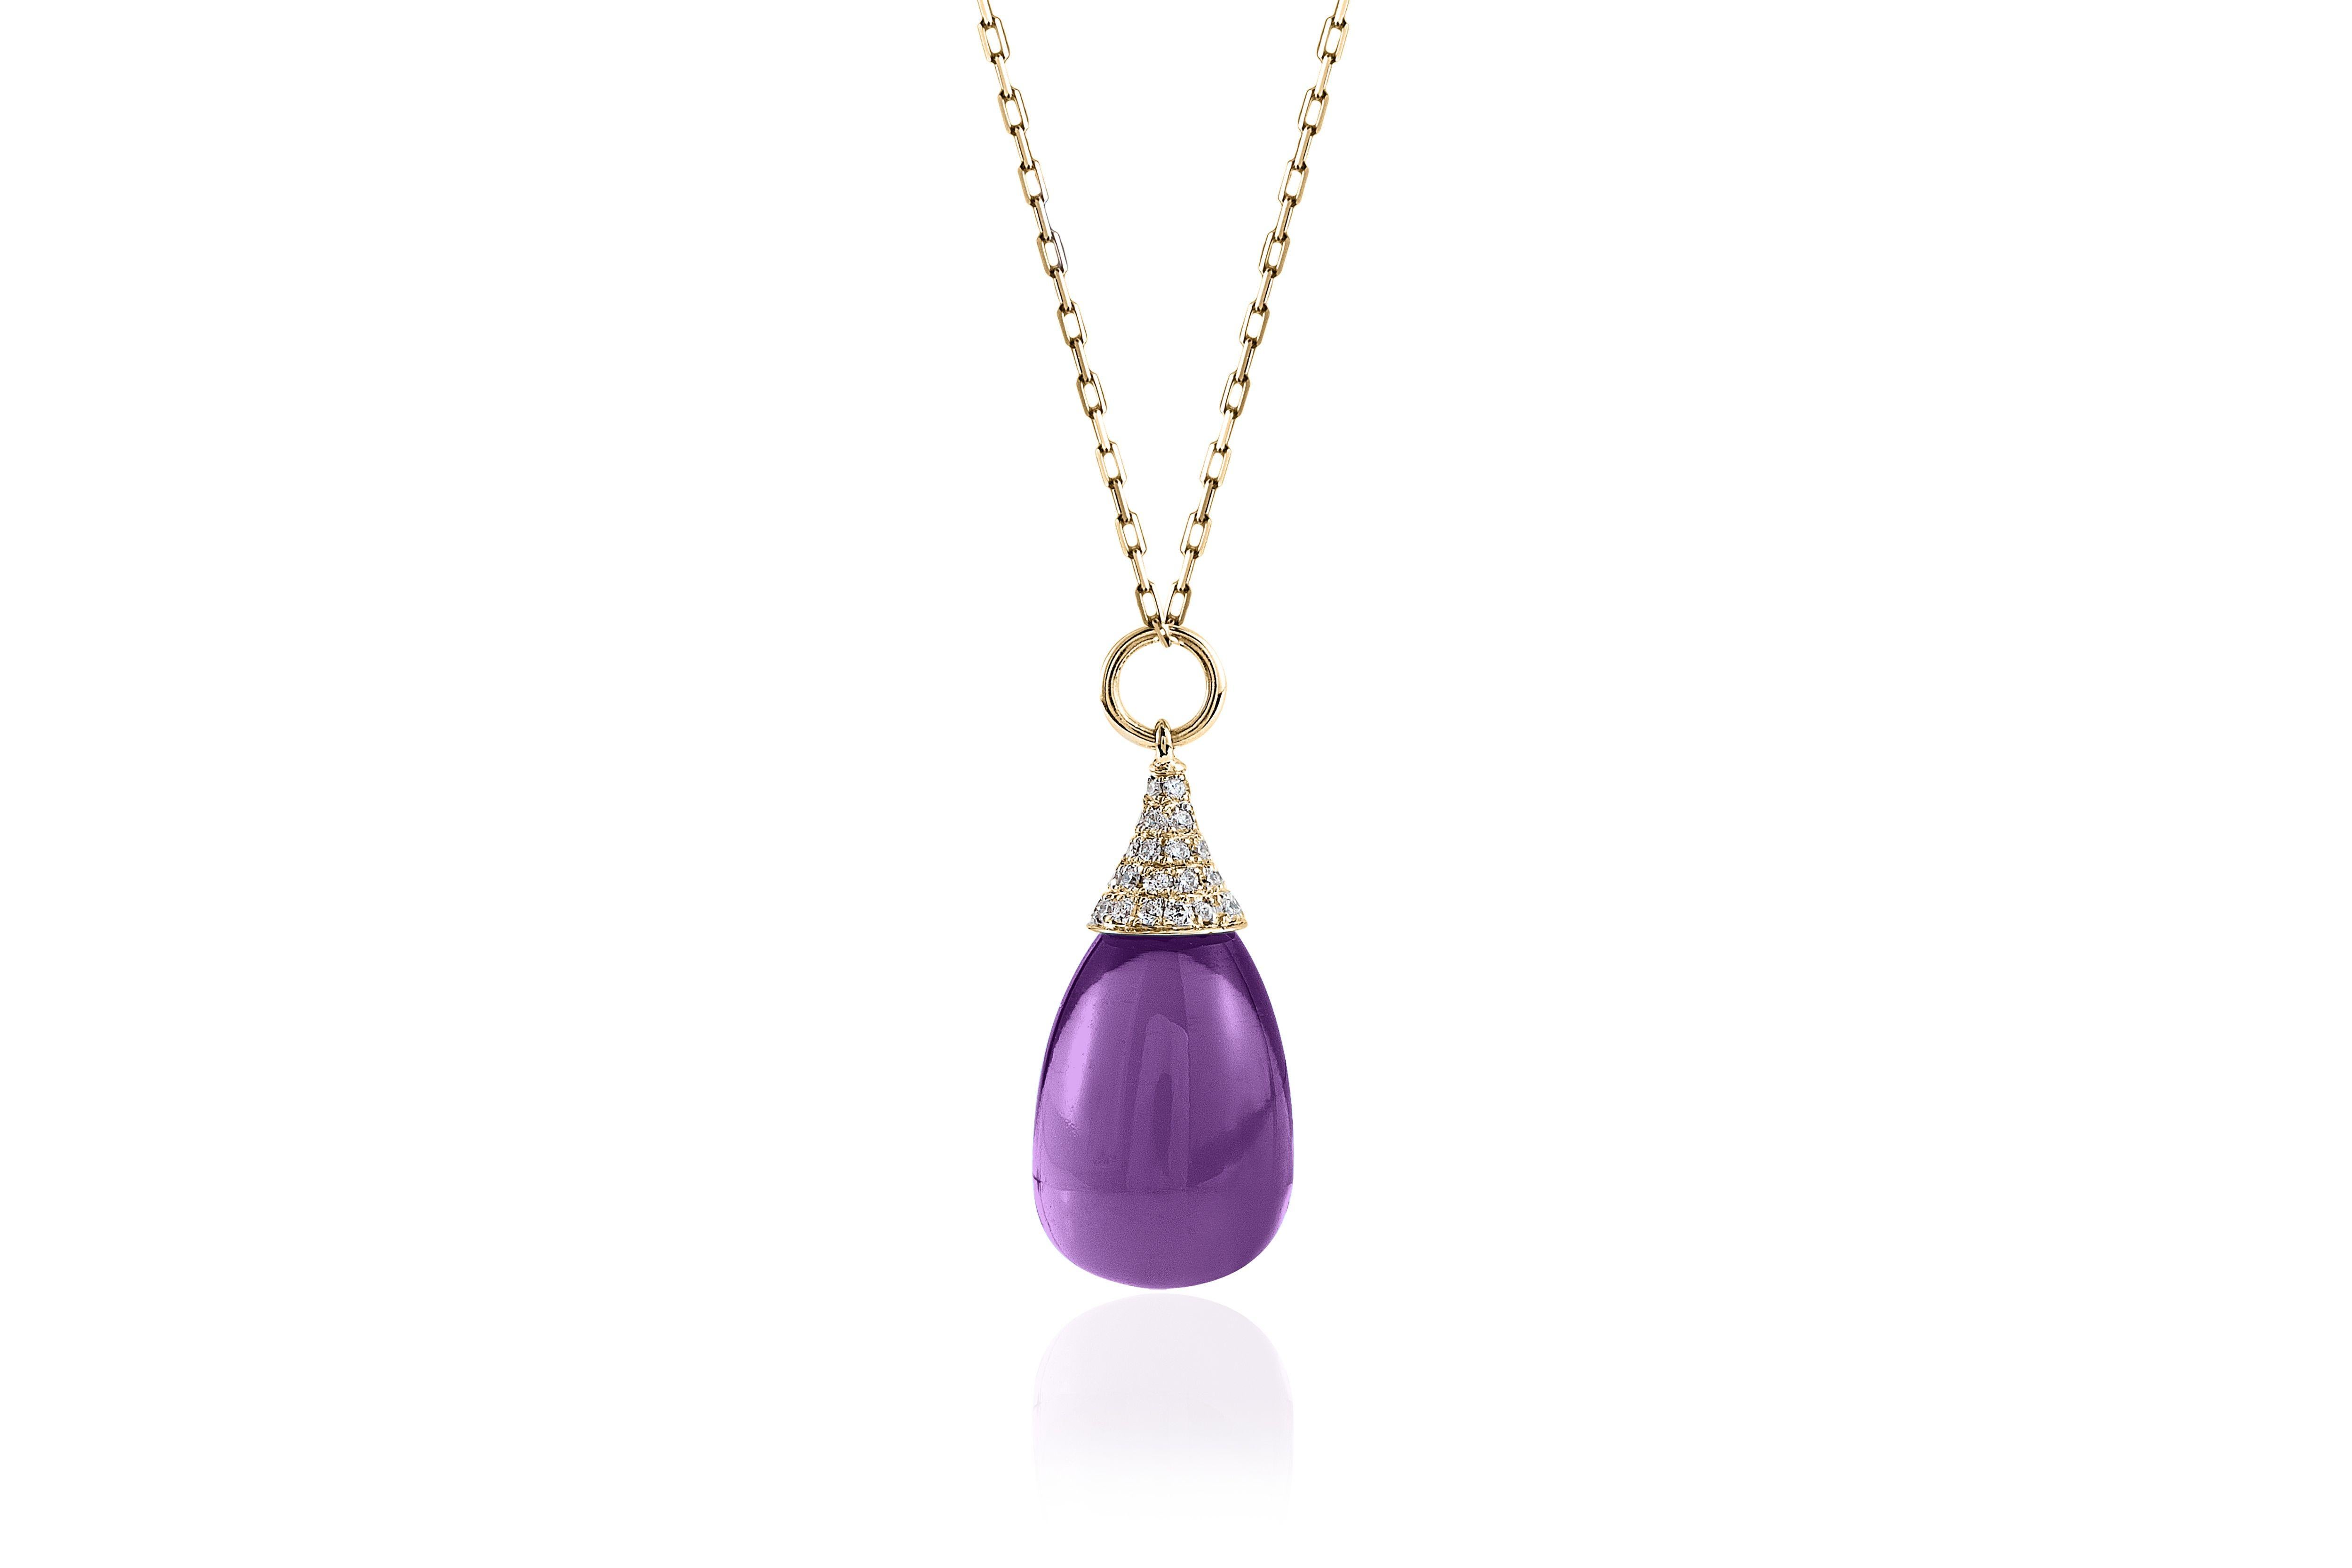 Amethyst Drop Pendant with Diamond Cap in 18K Yellow Gold on a 18'' Chain from 'Naughty' Collection
 Stone Size: 19 x 12 mm
 Diamonds: G-H / VS, Approx Wt:0.32 Cts